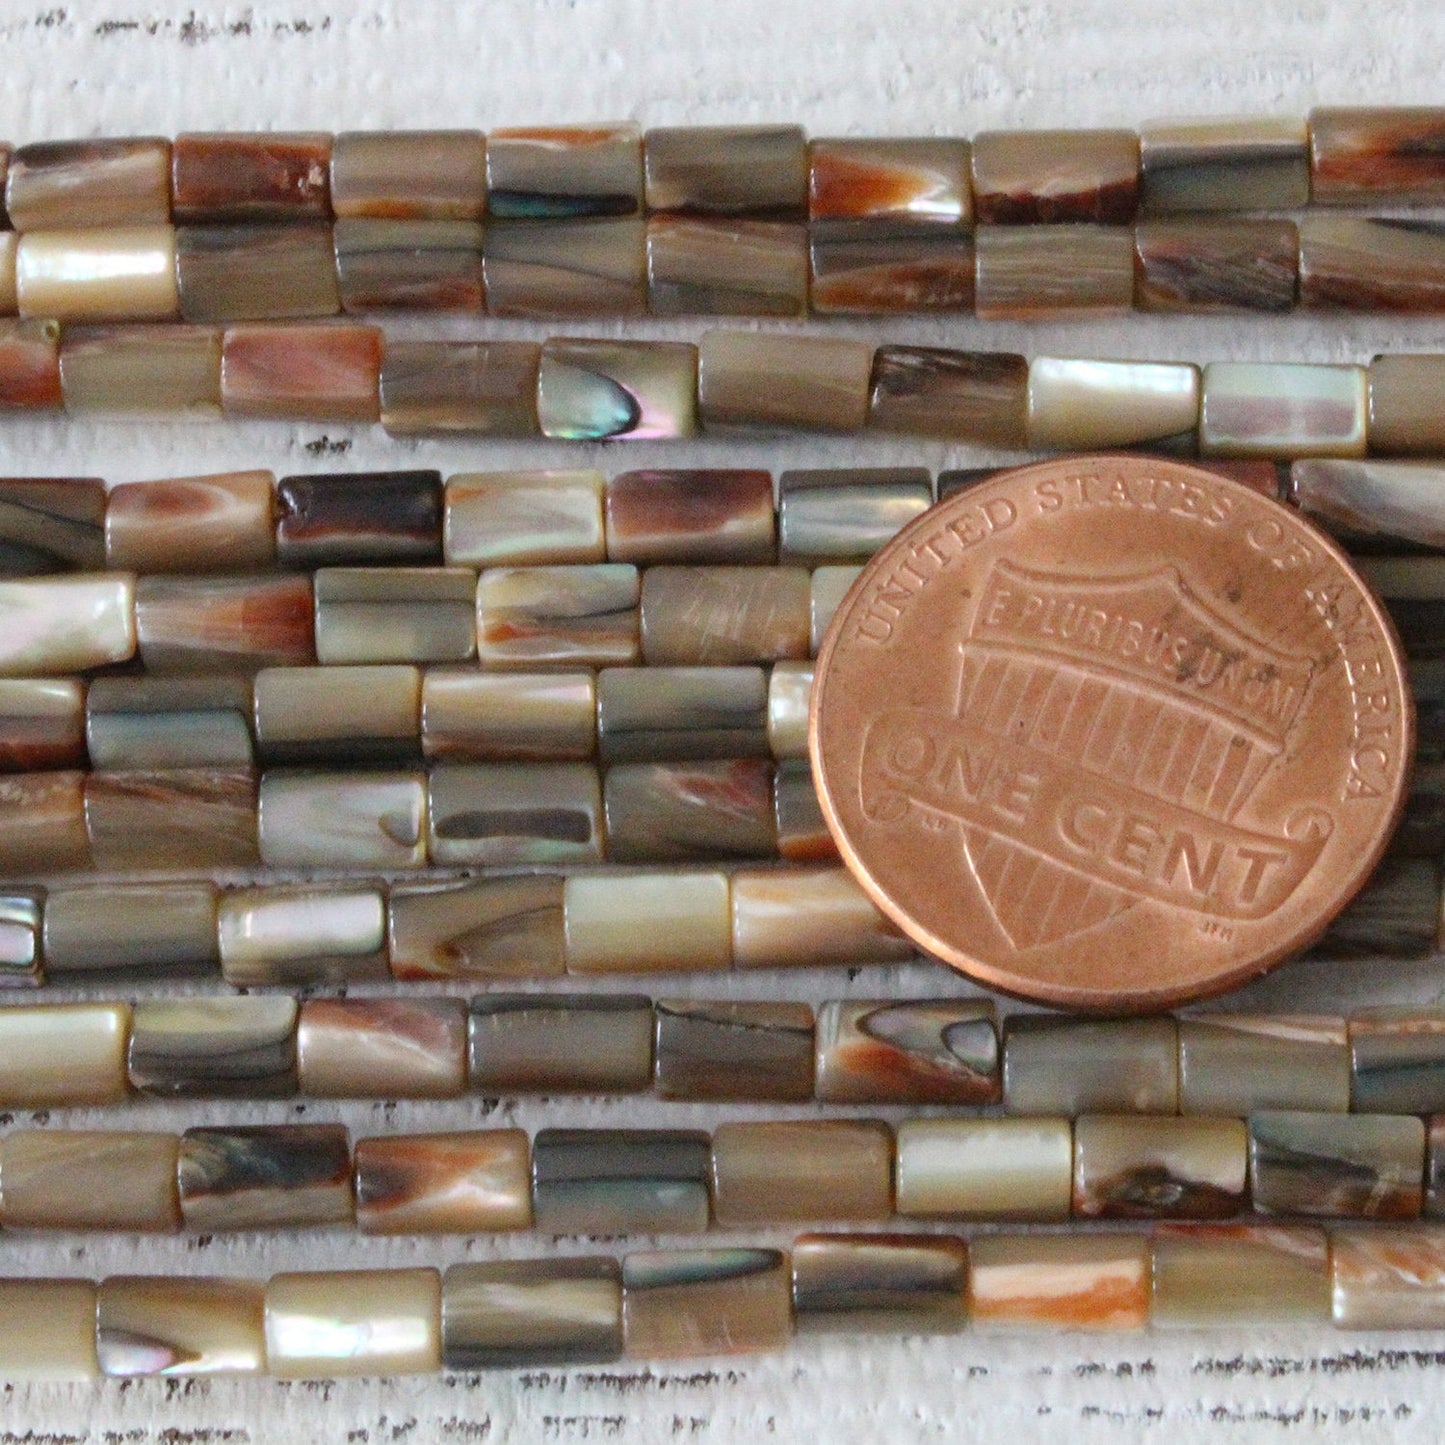 3x5mm Abalone Tube Beads - 8 inches